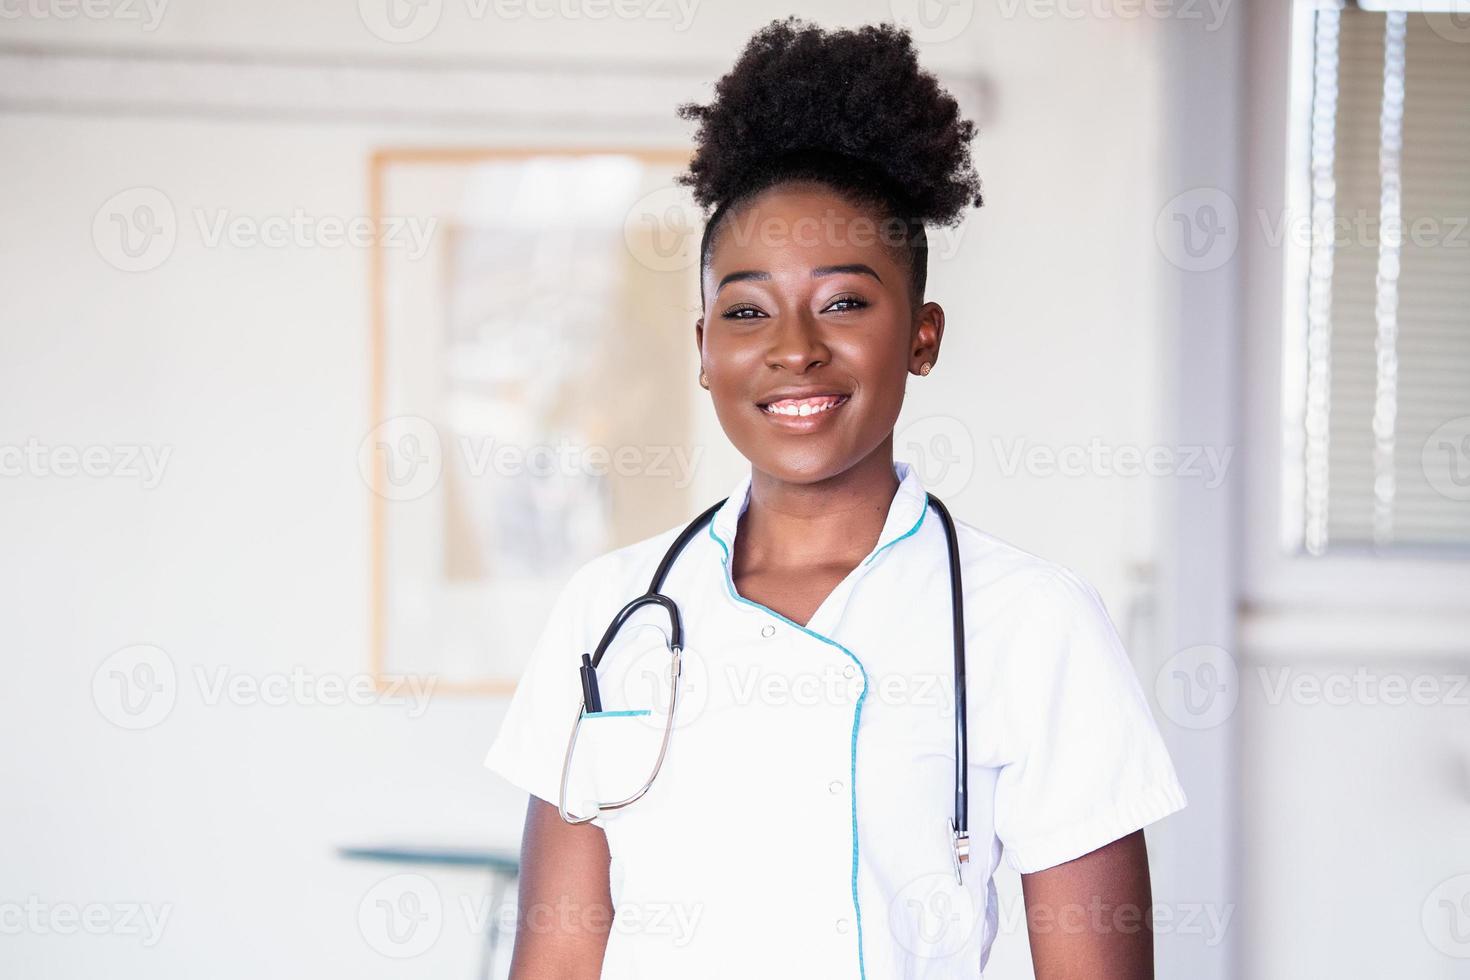 African American Doctor working in hospital , Healthcare and medical concept Stethoscope around her neck. Female black doctor filling up medical form at clipboard while standing straight in hospital photo